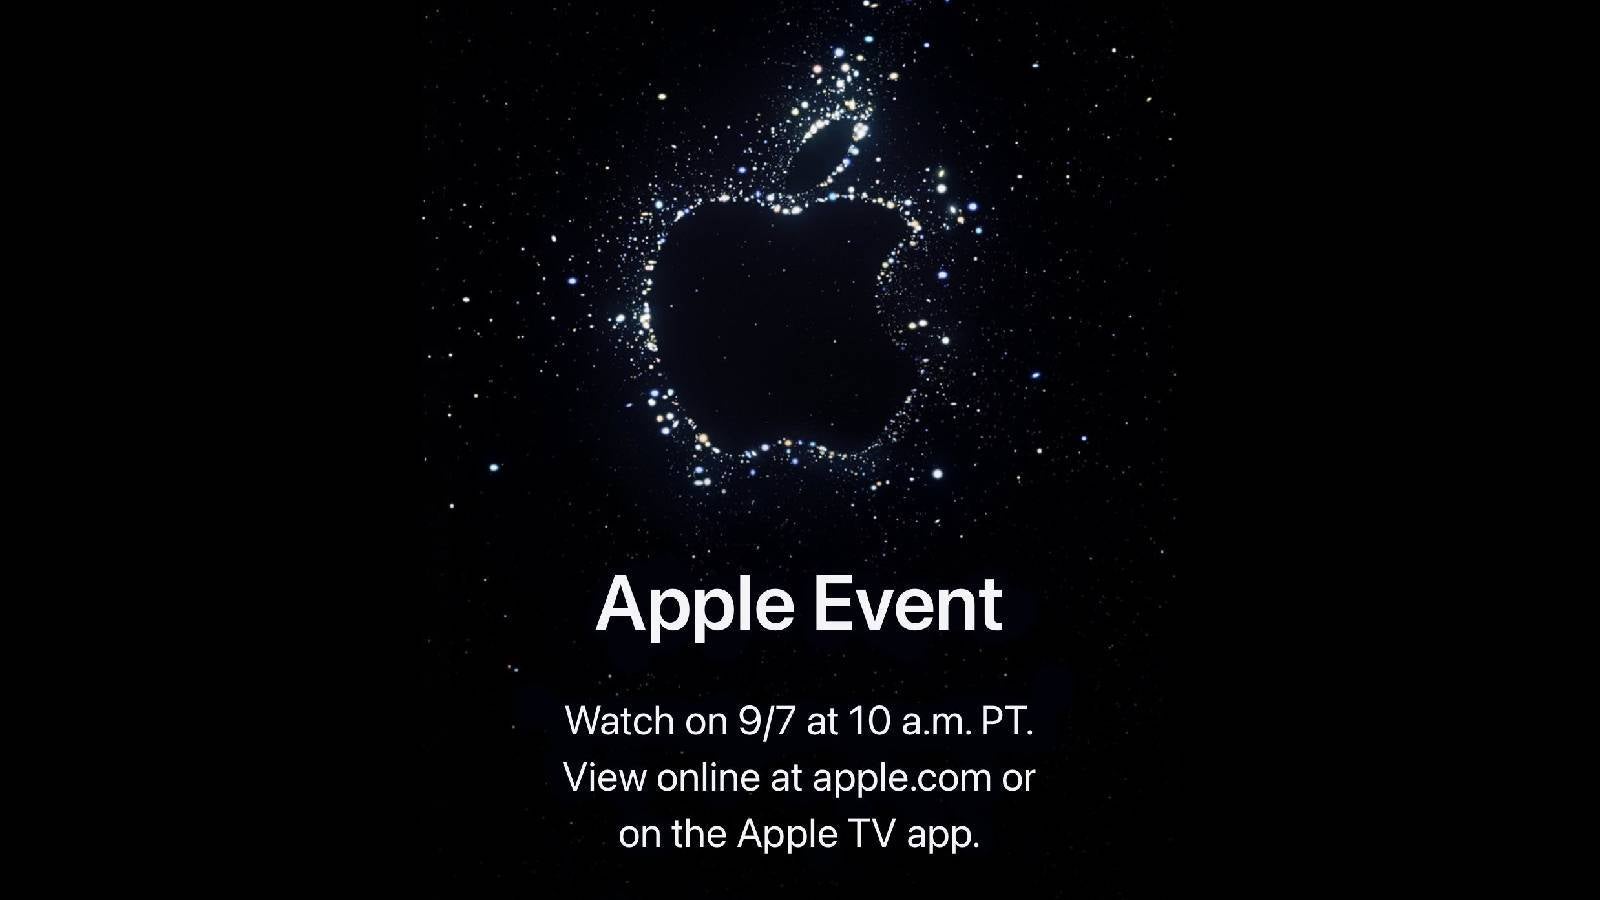 iPhone 14 event invite's Far Out tagline & spacey theme could be hinting at these new features